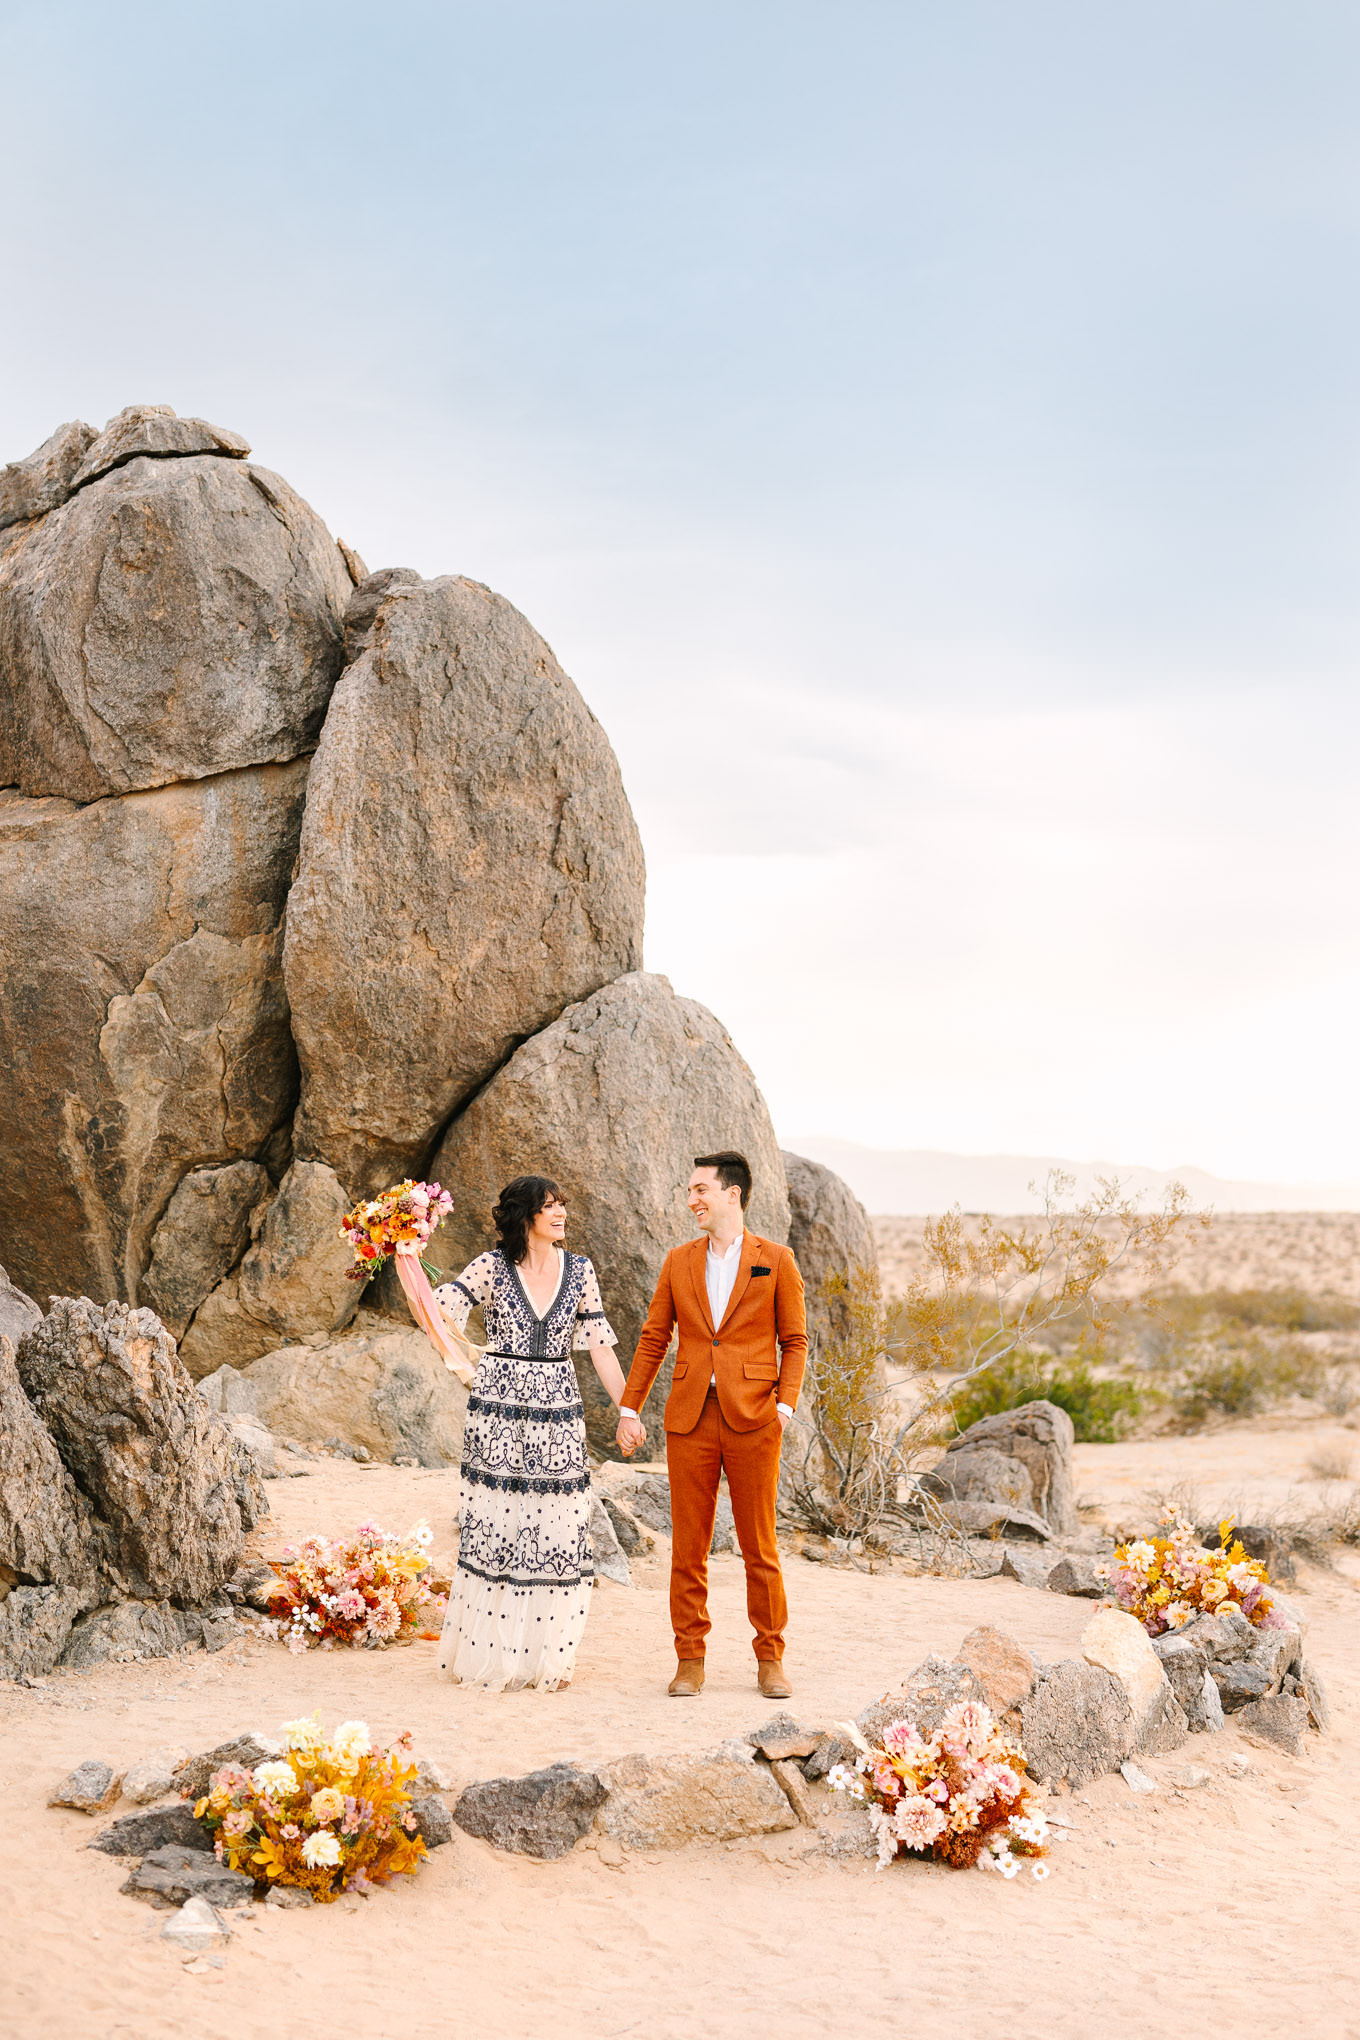 Nowhere Joshua Tree wedding ceremony | wedding and elopement photography roundup | Los Angeles and Palm Springs photographer | #losangeleswedding #palmspringswedding #elopementphotographer Source: Mary Costa Photography | Los Angeles